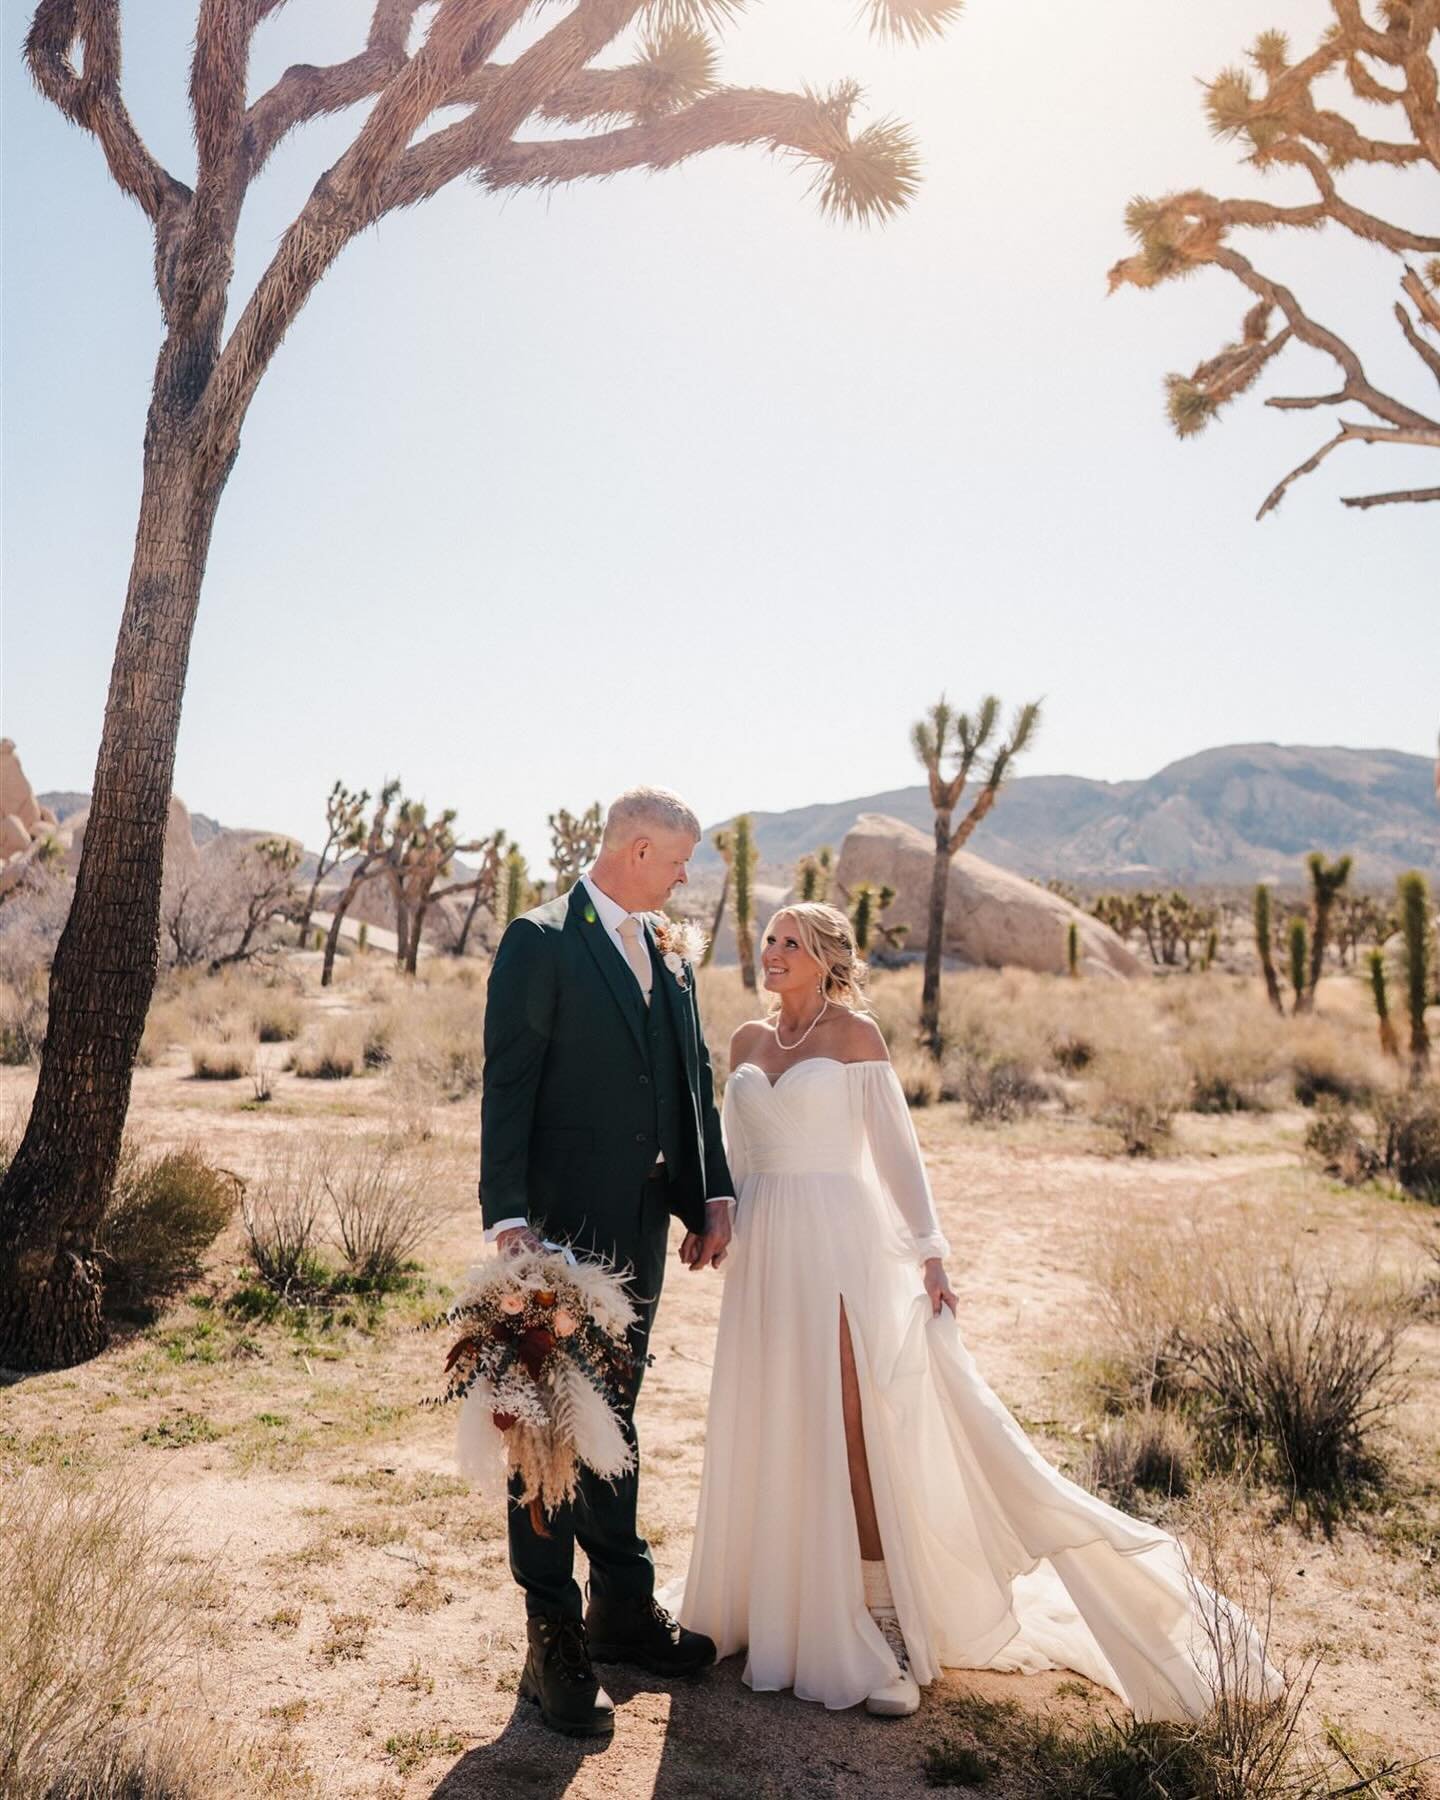 My 2025 weekday elopement calendar is open for booking!
So excited for all of the adventures ahead, all the National Parks, local mountain trails and cool airbnbs this career of mine leads me to.
This does mean my calendar is officially closed for 20